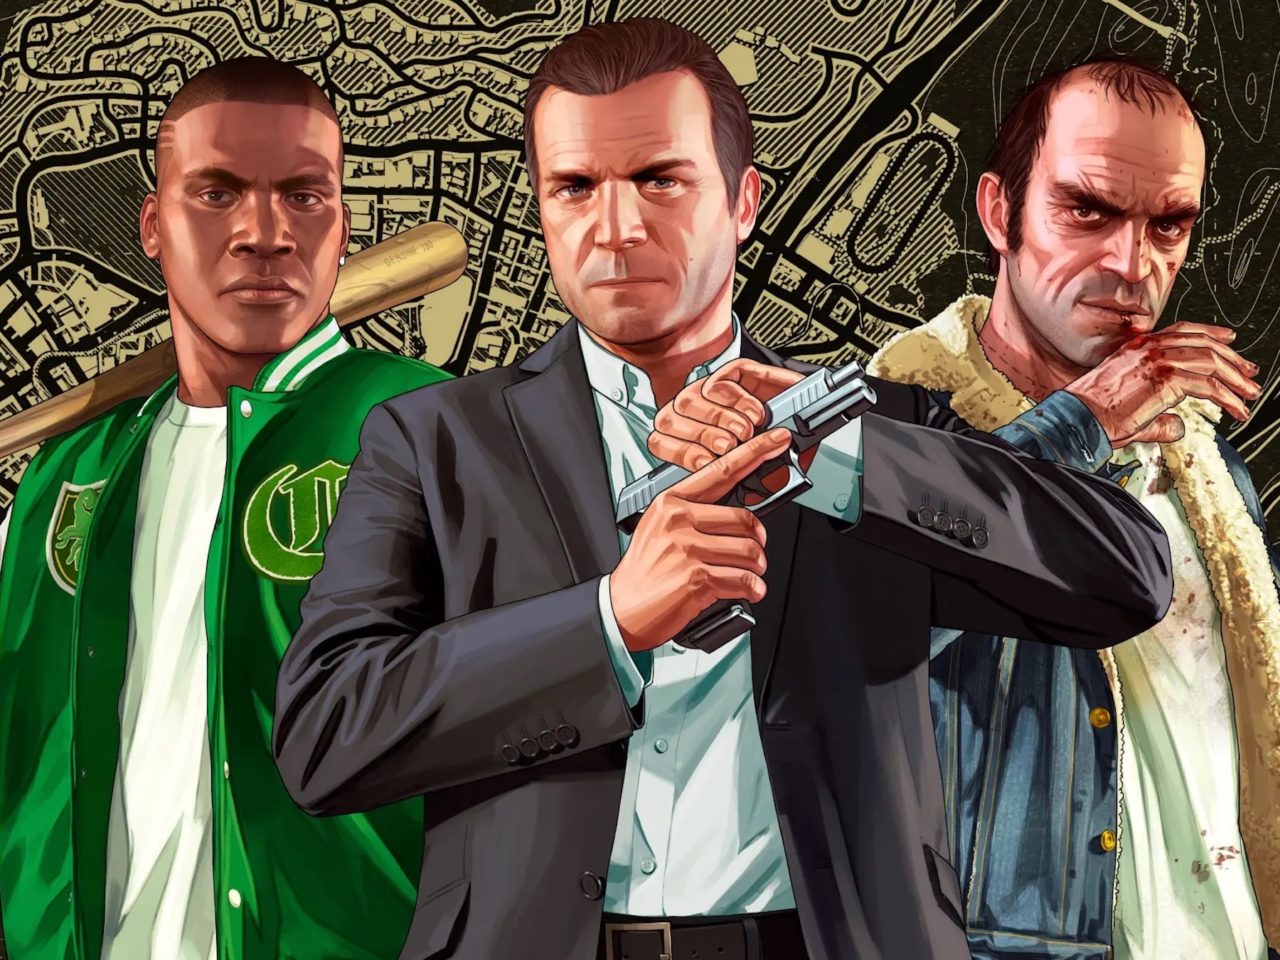 Grand Theft Auto V Inches Closer to Minecraft’s Throne with Remarkable Sales Milestone